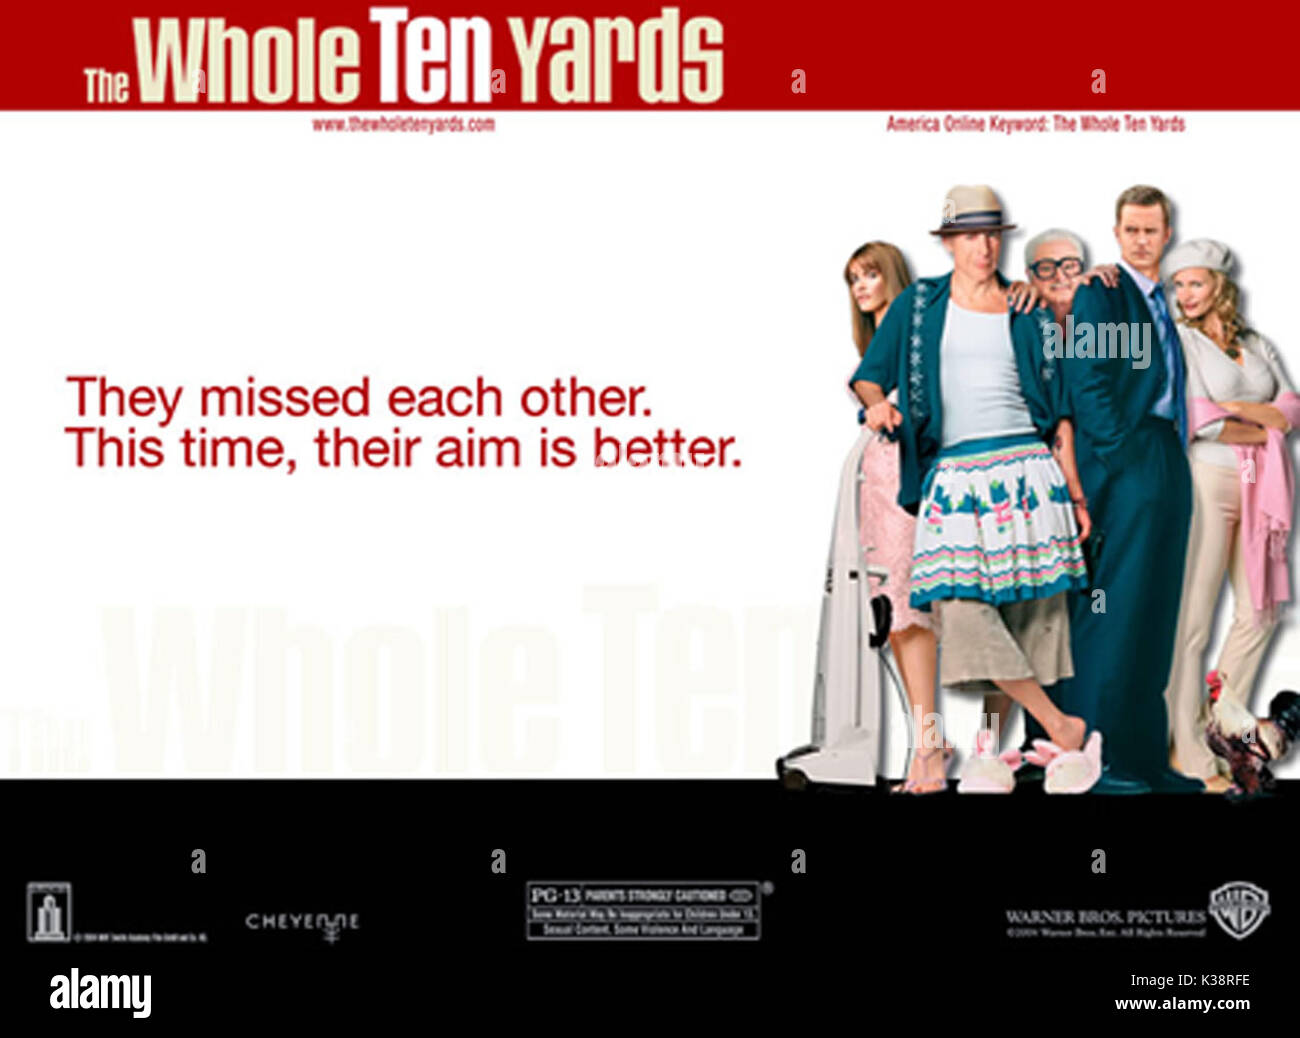 THE WHOLE TEN YARDS      Date: 2004 Stock Photo